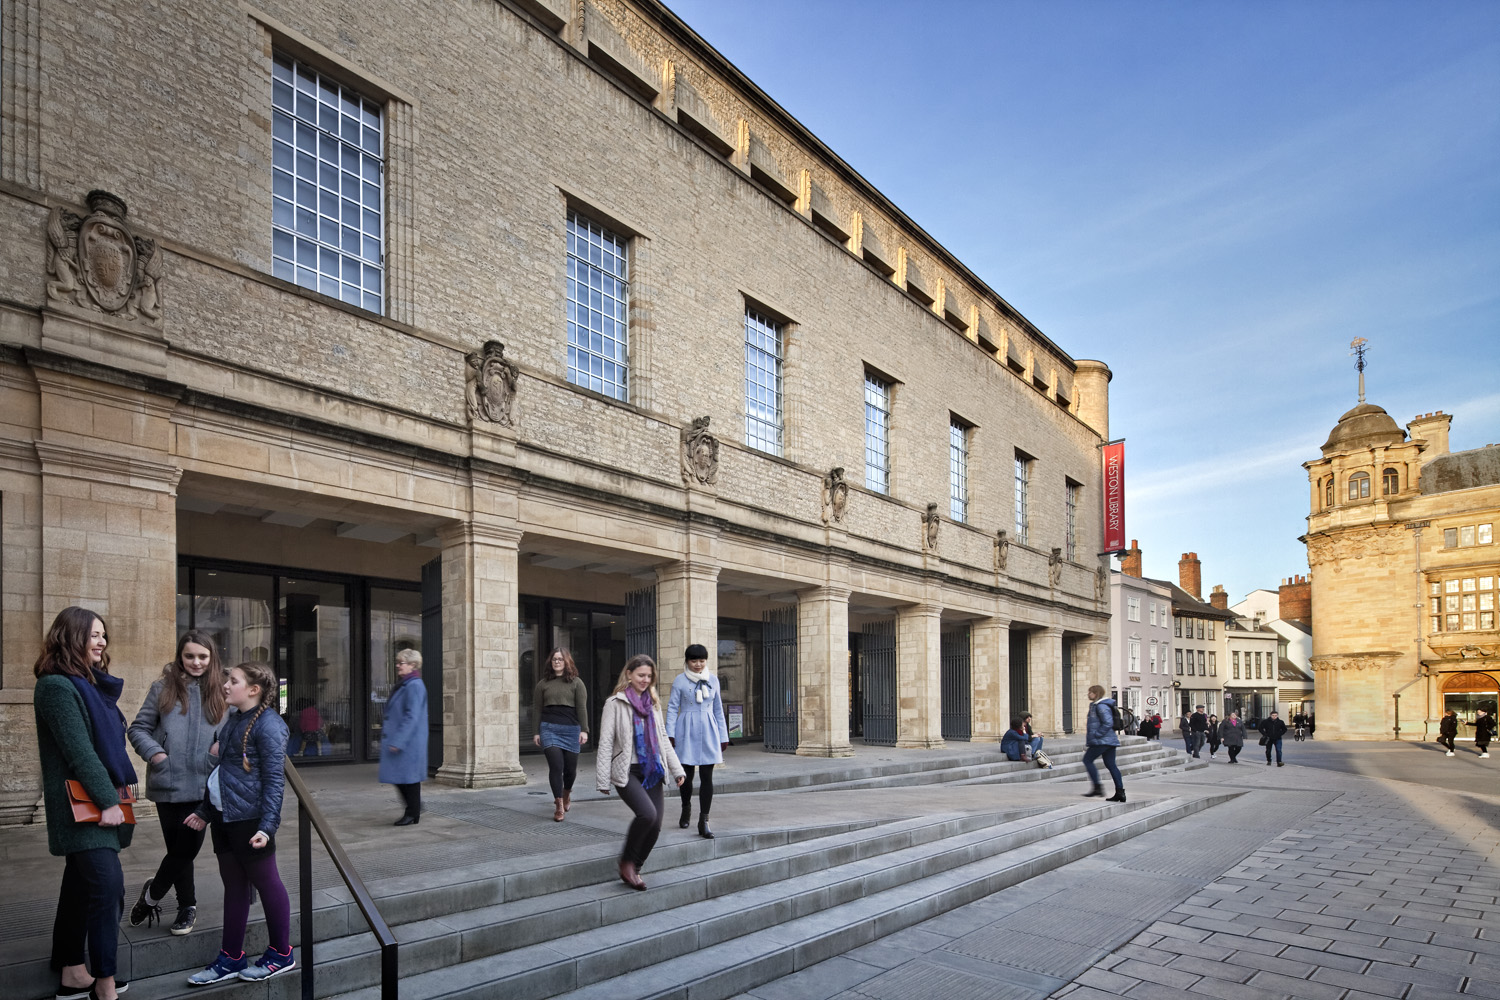  Weston Library, Bodleian Libraries, University of Oxford, Oxford, UK 